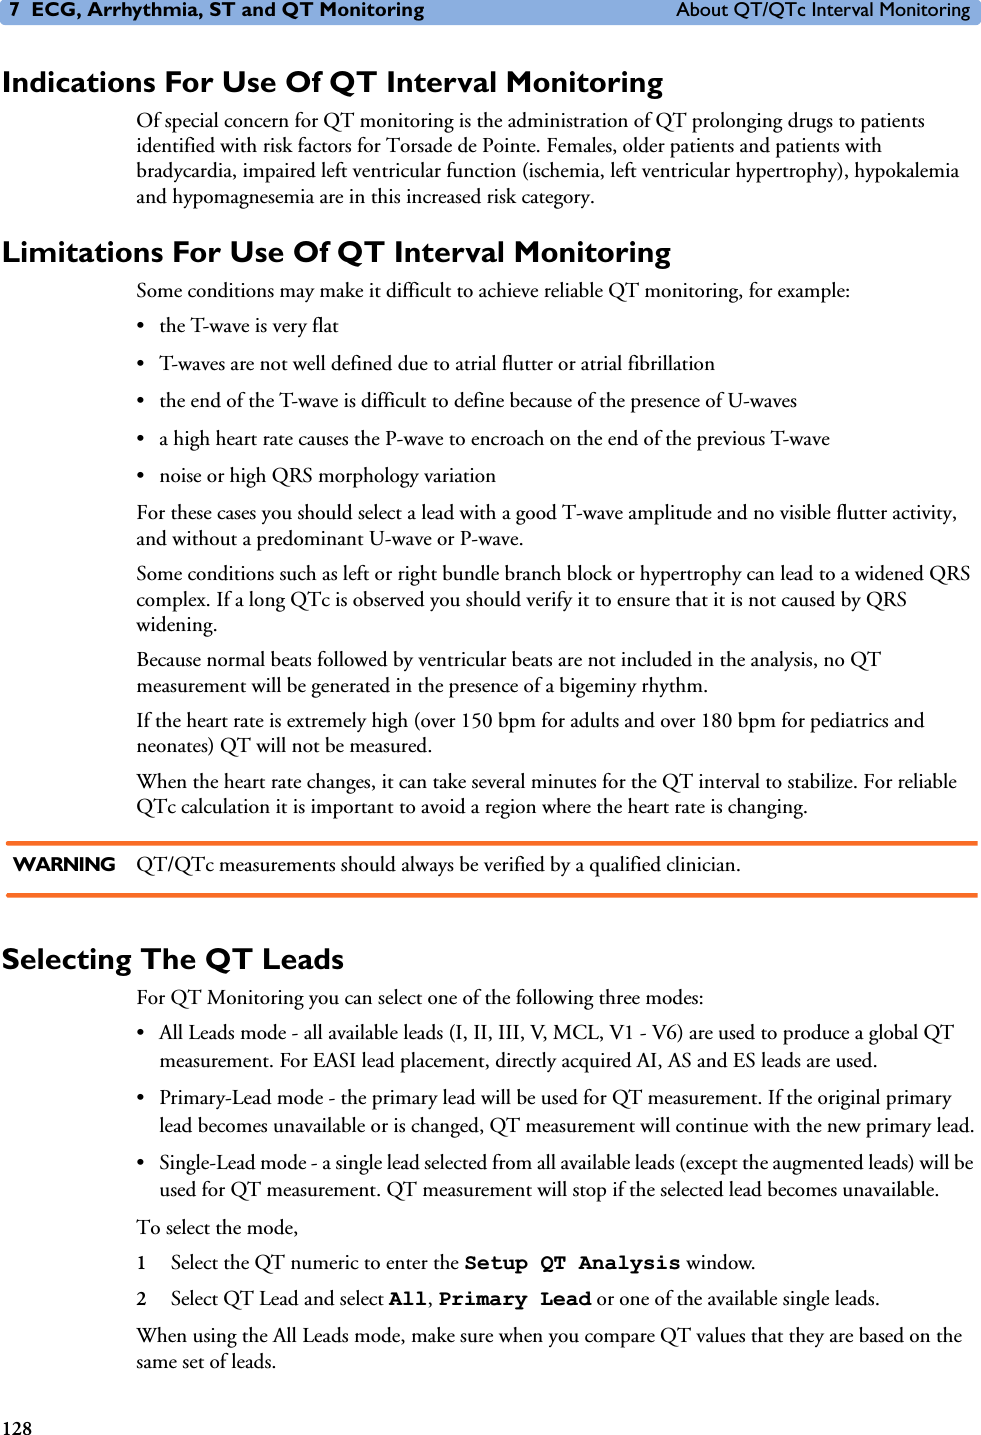 7 ECG, Arrhythmia, ST and QT Monitoring About QT/QTc Interval Monitoring128Indications For Use Of QT Interval MonitoringOf special concern for QT monitoring is the administration of QT prolonging drugs to patients identified with risk factors for Torsade de Pointe. Females, older patients and patients with bradycardia, impaired left ventricular function (ischemia, left ventricular hypertrophy), hypokalemia and hypomagnesemia are in this increased risk category. Limitations For Use Of QT Interval MonitoringSome conditions may make it difficult to achieve reliable QT monitoring, for example: • the T-wave is very flat• T-waves are not well defined due to atrial flutter or atrial fibrillation• the end of the T-wave is difficult to define because of the presence of U-waves• a high heart rate causes the P-wave to encroach on the end of the previous T-wave• noise or high QRS morphology variationFor these cases you should select a lead with a good T-wave amplitude and no visible flutter activity, and without a predominant U-wave or P-wave. Some conditions such as left or right bundle branch block or hypertrophy can lead to a widened QRS complex. If a long QTc is observed you should verify it to ensure that it is not caused by QRS widening.Because normal beats followed by ventricular beats are not included in the analysis, no QT measurement will be generated in the presence of a bigeminy rhythm. If the heart rate is extremely high (over 150 bpm for adults and over 180 bpm for pediatrics and neonates) QT will not be measured. When the heart rate changes, it can take several minutes for the QT interval to stabilize. For reliable QTc calculation it is important to avoid a region where the heart rate is changing. WARNING QT/QTc measurements should always be verified by a qualified clinician.Selecting The QT LeadsFor QT Monitoring you can select one of the following three modes:• All Leads mode - all available leads (I, II, III, V, MCL, V1 - V6) are used to produce a global QT measurement. For EASI lead placement, directly acquired AI, AS and ES leads are used. • Primary-Lead mode - the primary lead will be used for QT measurement. If the original primary lead becomes unavailable or is changed, QT measurement will continue with the new primary lead.• Single-Lead mode - a single lead selected from all available leads (except the augmented leads) will be used for QT measurement. QT measurement will stop if the selected lead becomes unavailable. To select the mode, 1Select the QT numeric to enter the Setup QT Analysis window.2Select QT Lead and select All, Primary Lead or one of the available single leads.When using the All Leads mode, make sure when you compare QT values that they are based on the same set of leads. 